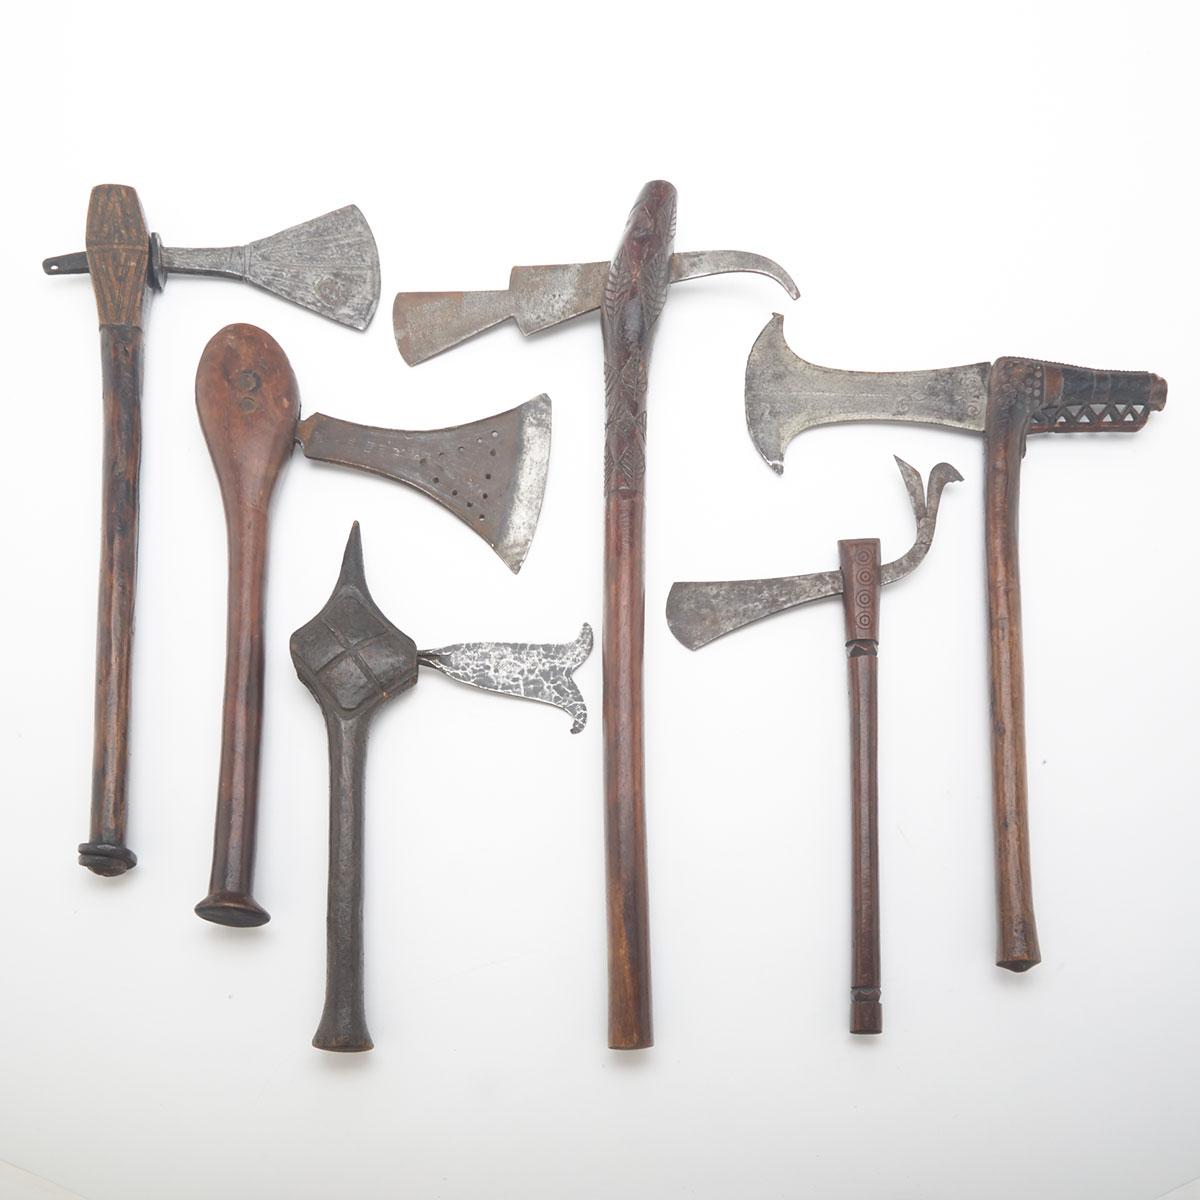 Six African Axes, early-mid 20th century